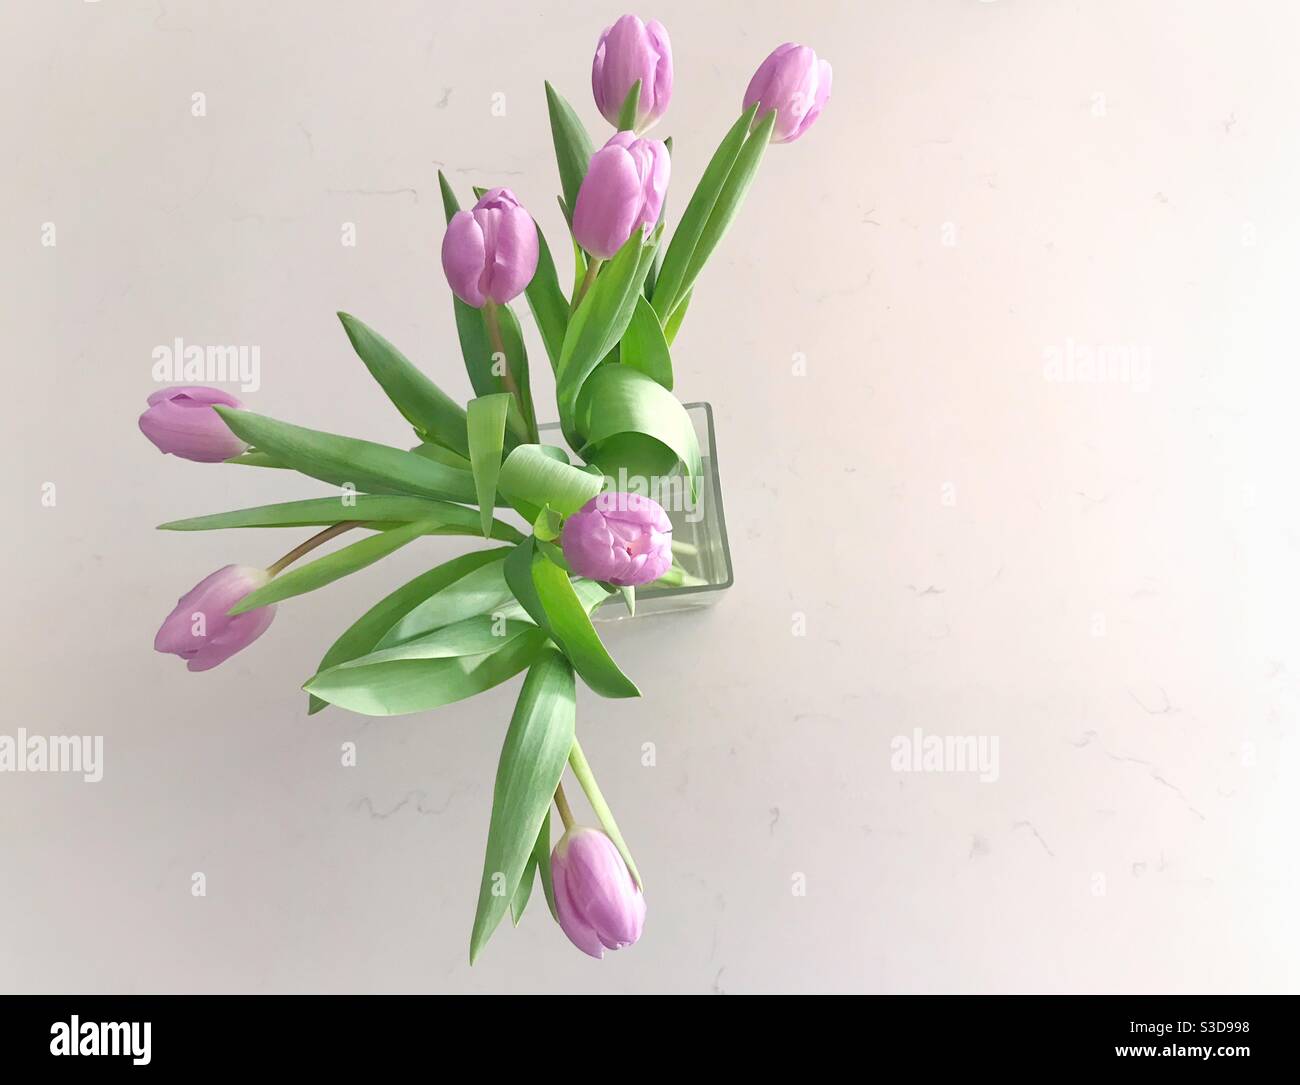 Pale lilac tulips in a glass vase on a white worktop Stock Photo